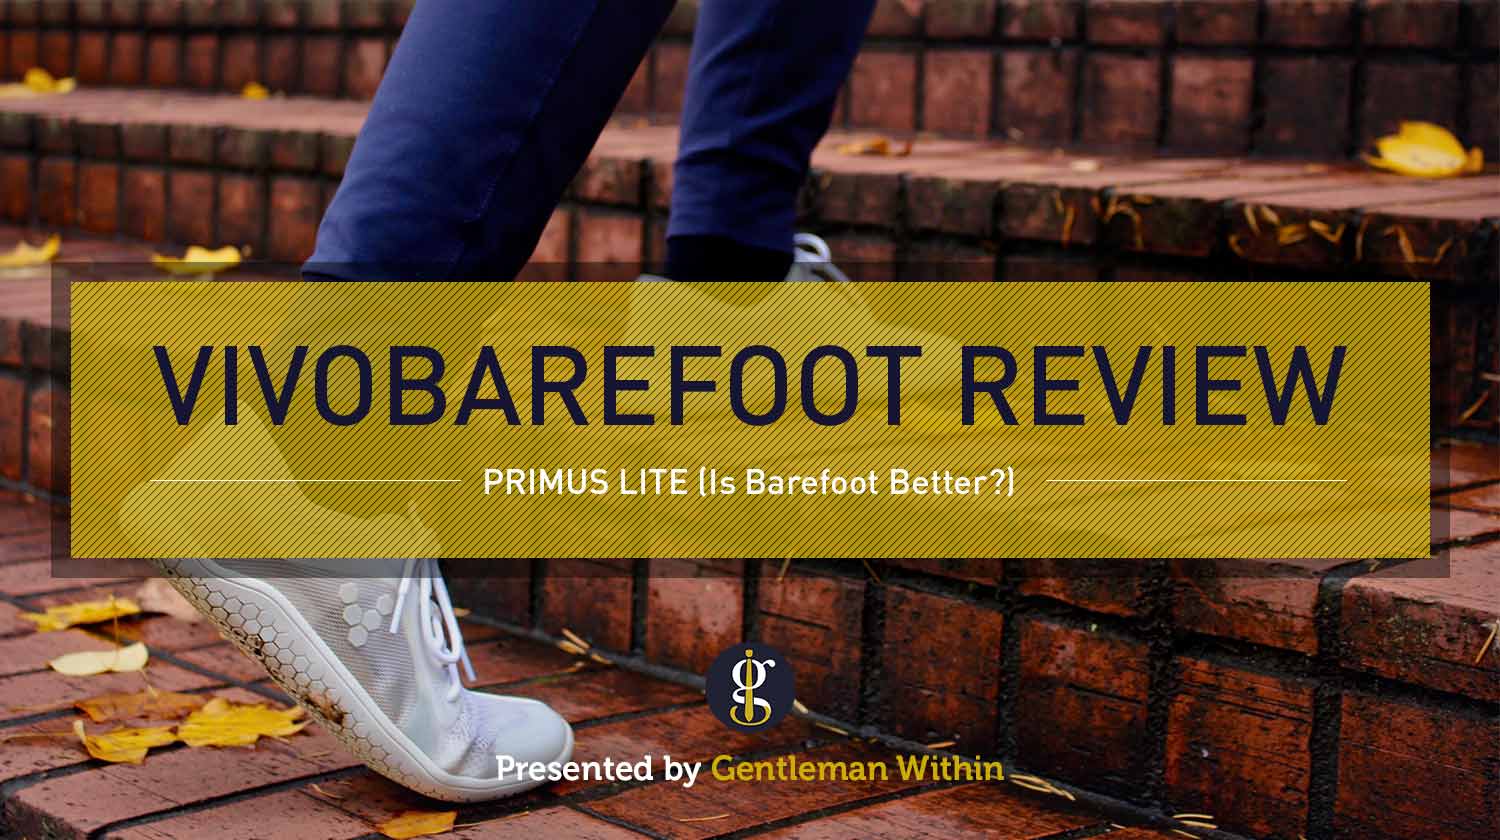 Vivobarefoot Primus Lite Review (Is Barefoot Better?) | GENTLEMAN WITHIN